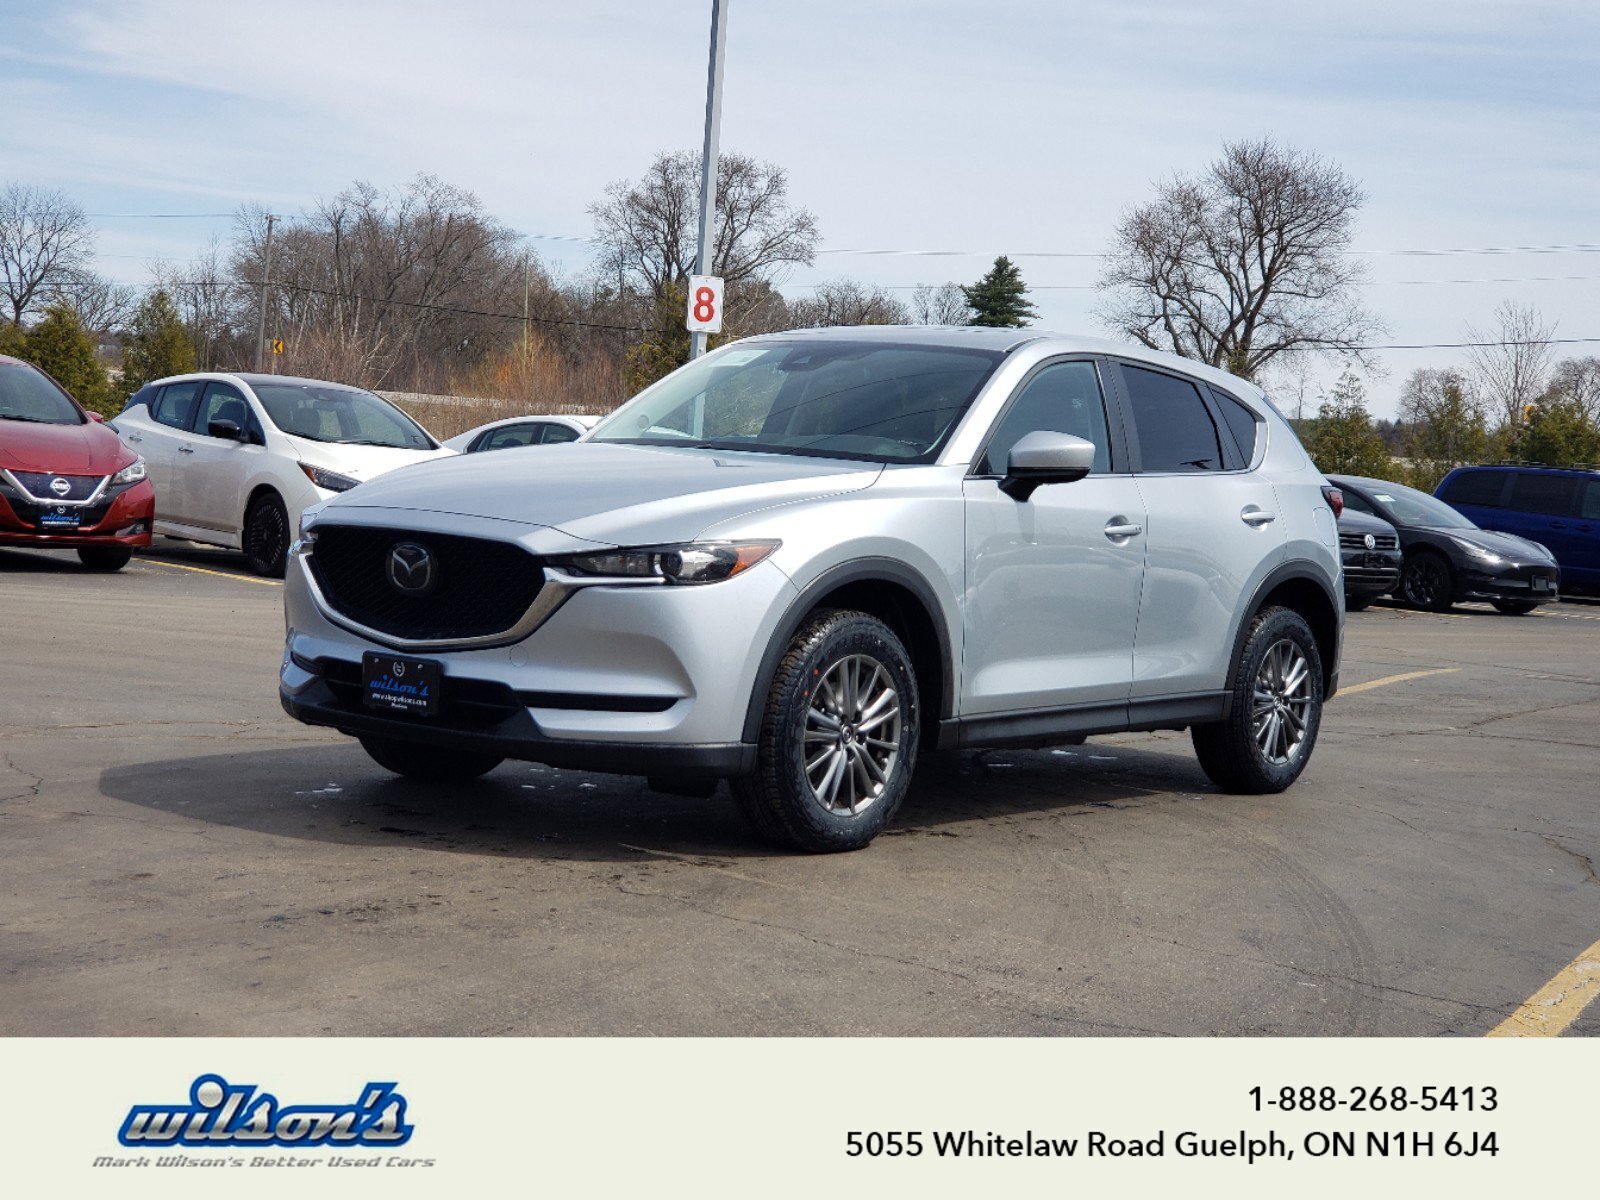 2018 Mazda CX-5 GS AWD - Leather/Suede, Sunroof, Navigation, Heate